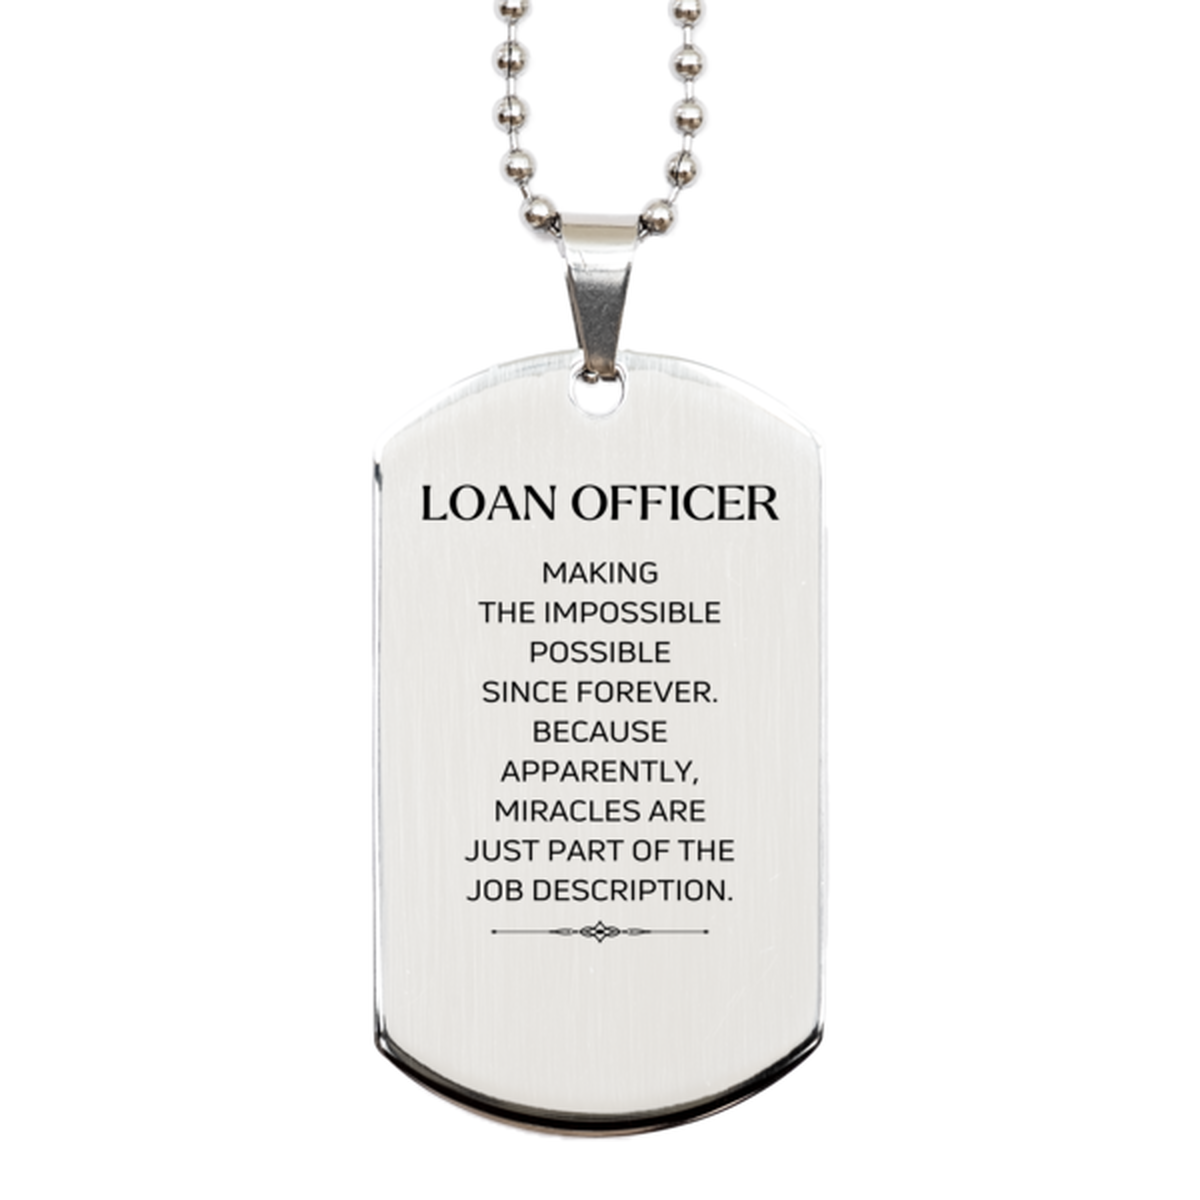 Funny Loan Officer Gifts, Miracles are just part of the job description, Inspirational Birthday Silver Dog Tag For Loan Officer, Men, Women, Coworkers, Friends, Boss